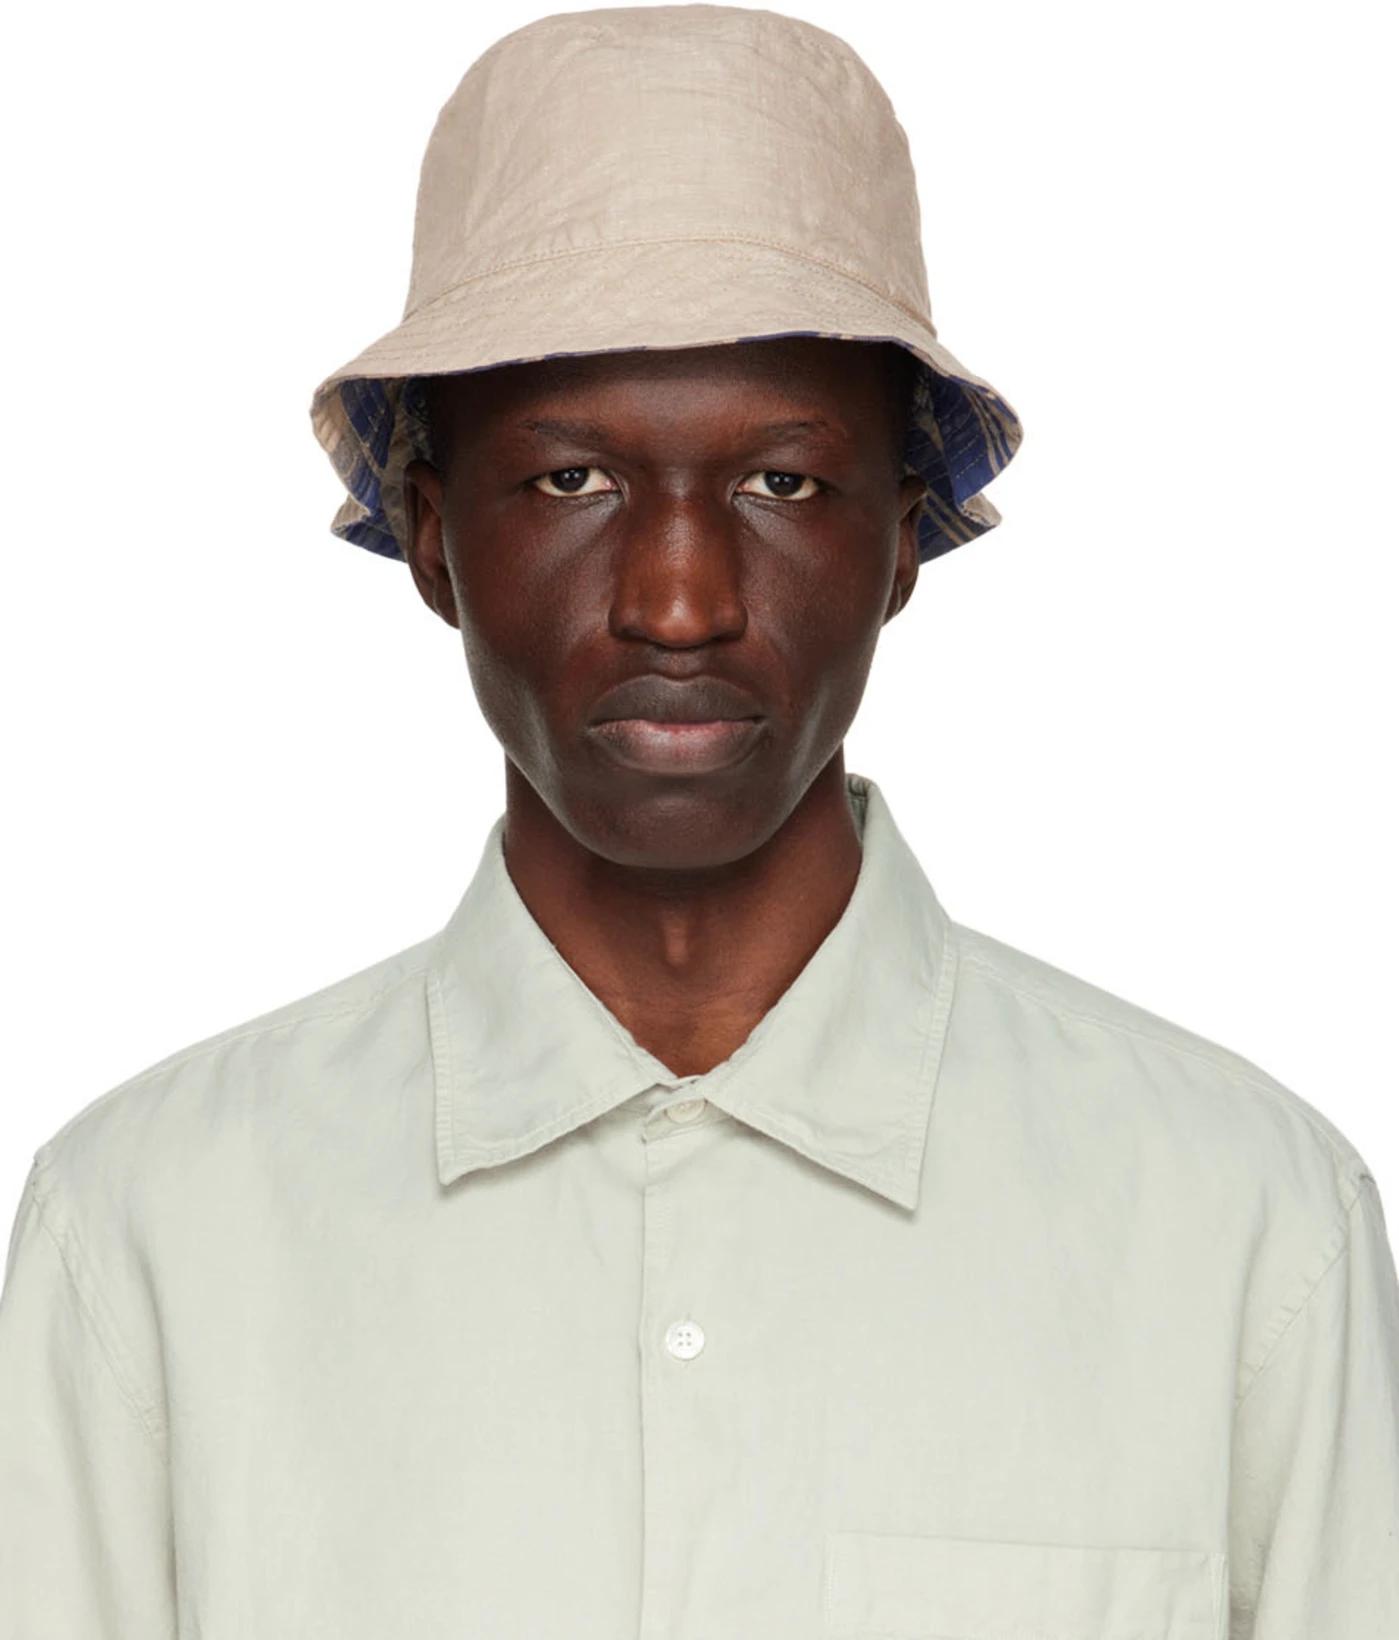 Reversible Tan & Blue Cotton Bucket Hat by ANOTHER ASPECT